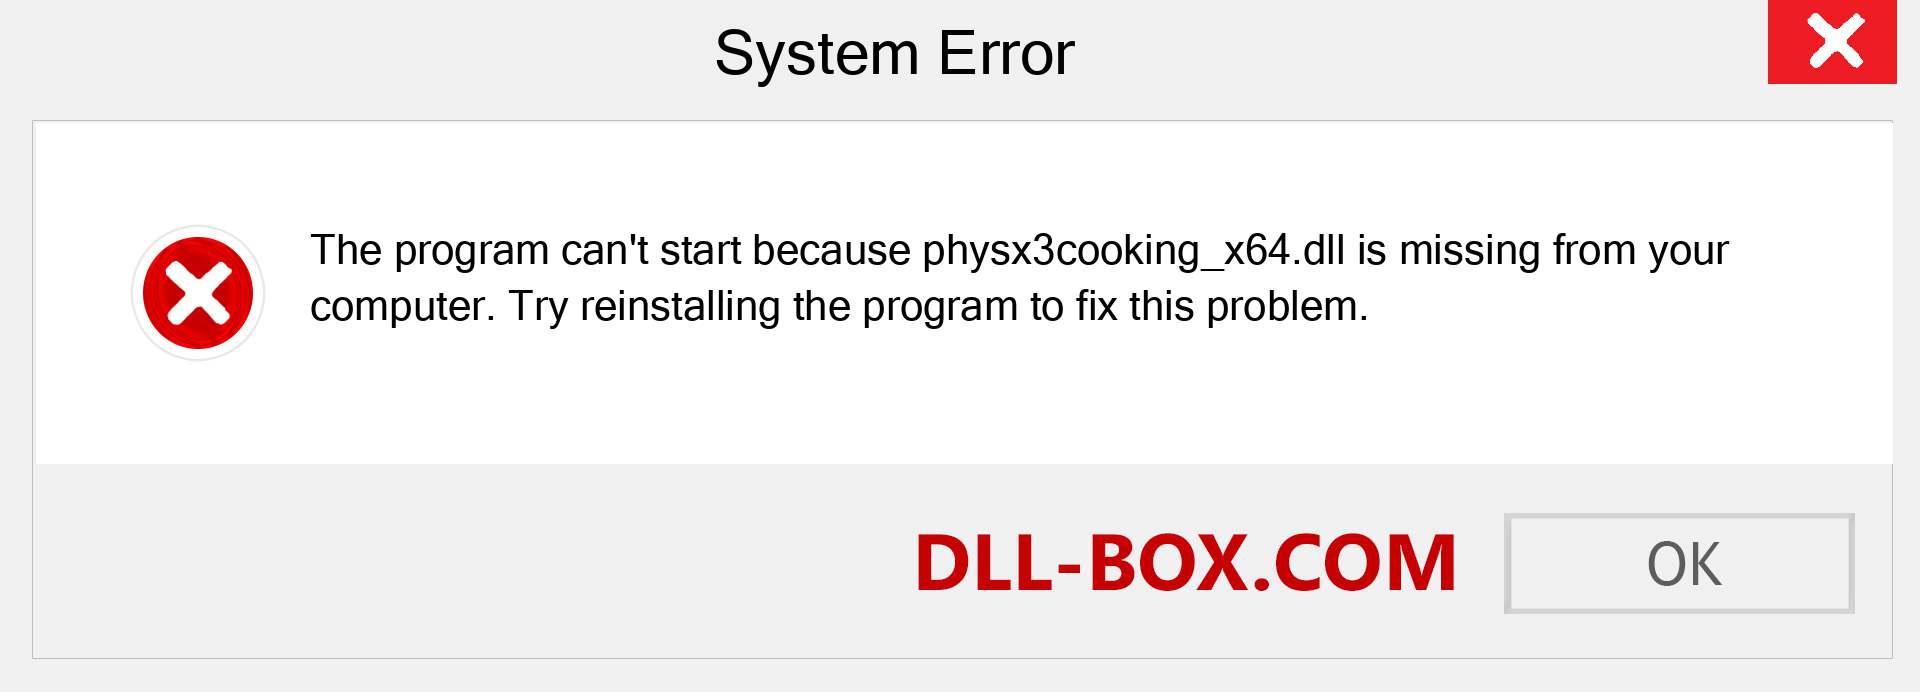  physx3cooking_x64.dll file is missing?. Download for Windows 7, 8, 10 - Fix  physx3cooking_x64 dll Missing Error on Windows, photos, images